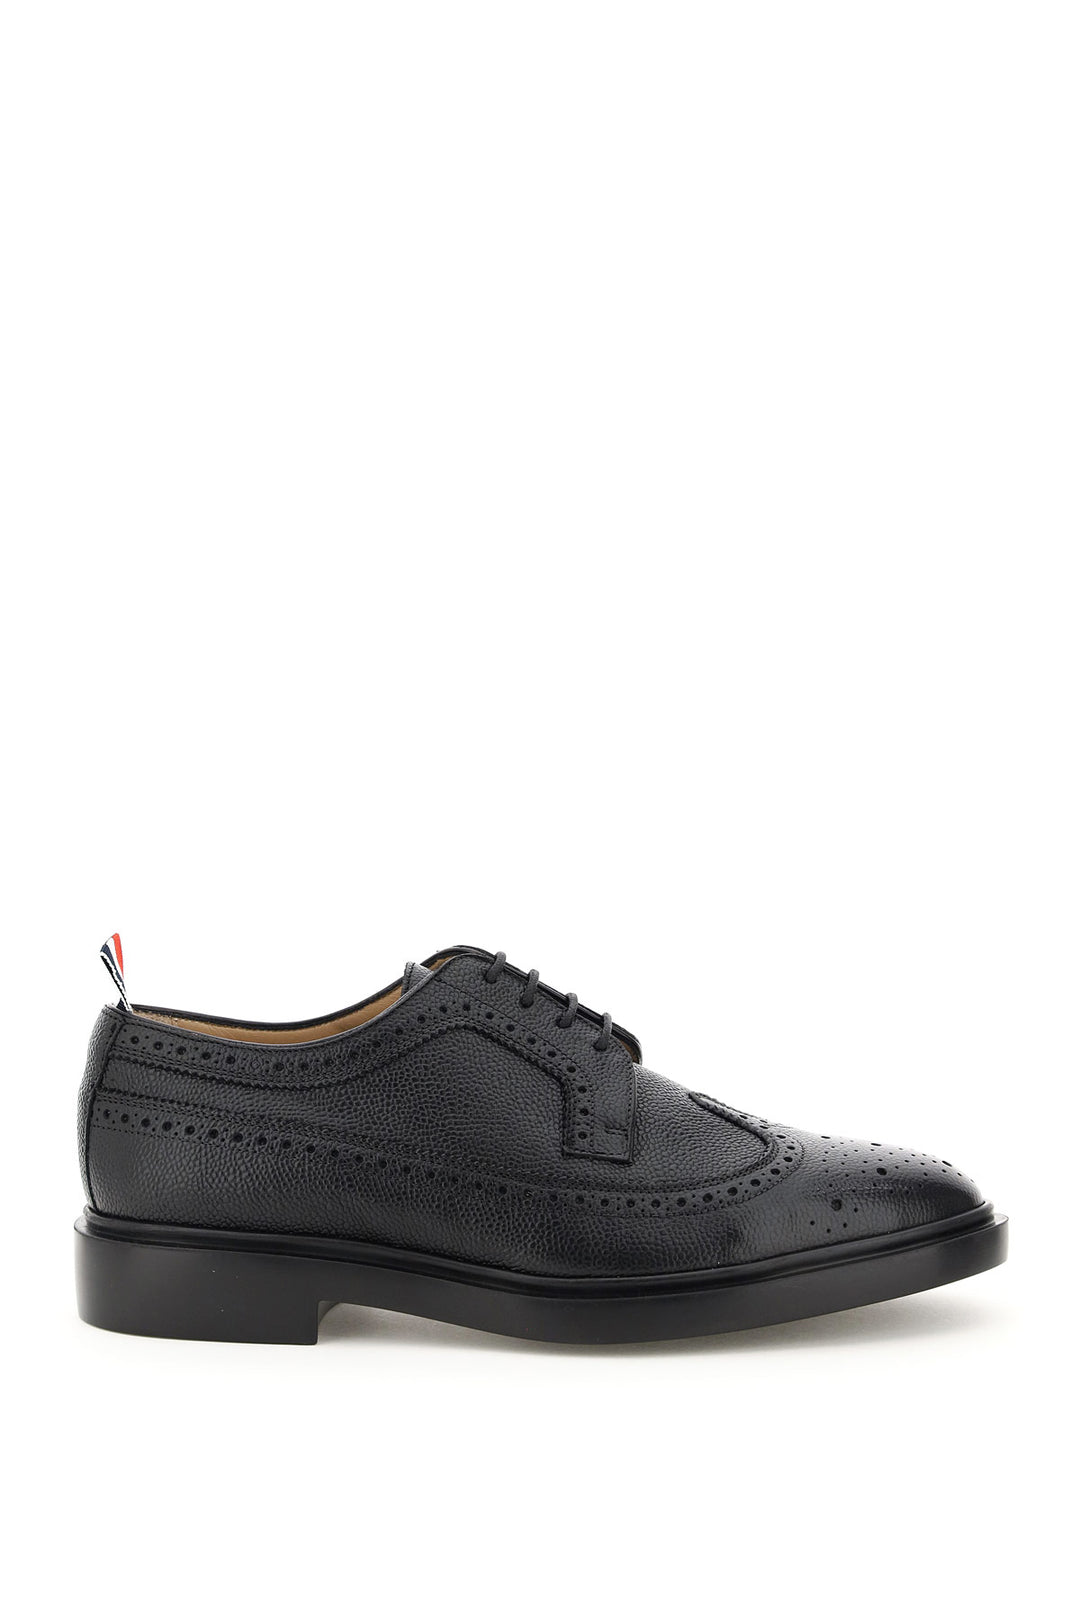 Thom Browne Longwing Brogue Lace Up Shoes   Nero